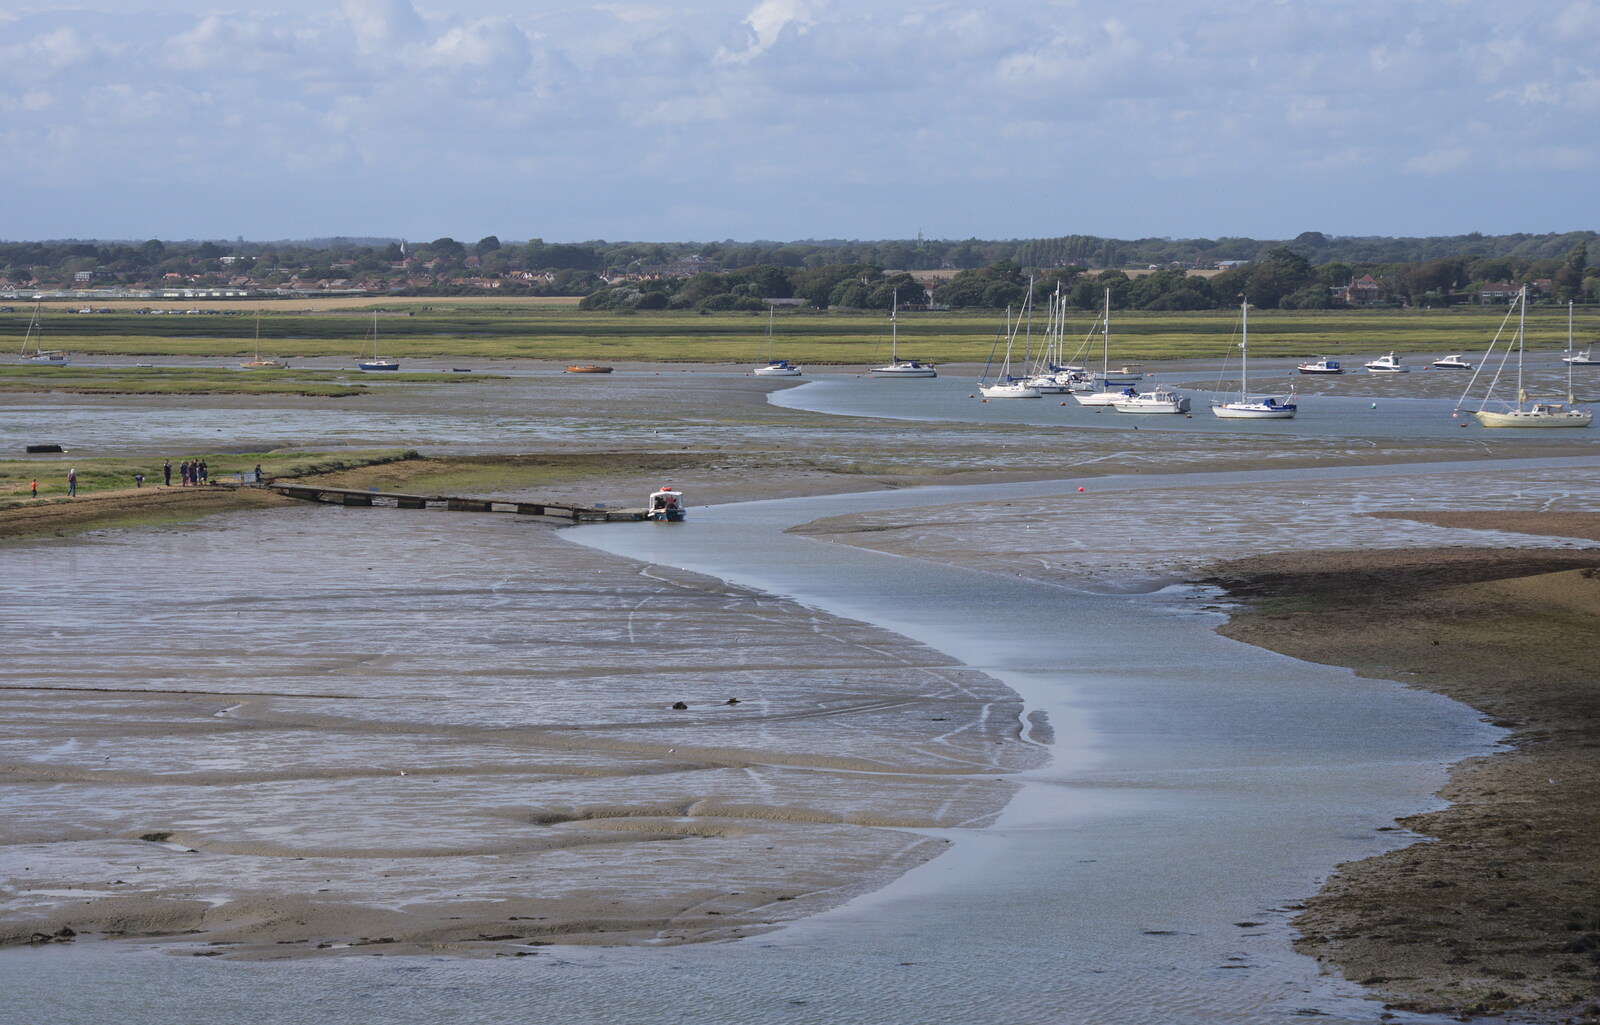 Back on the river, the tide has gone out from A Trip to Hurst Castle, Keyhaven, Hampshire - 28th August 2015